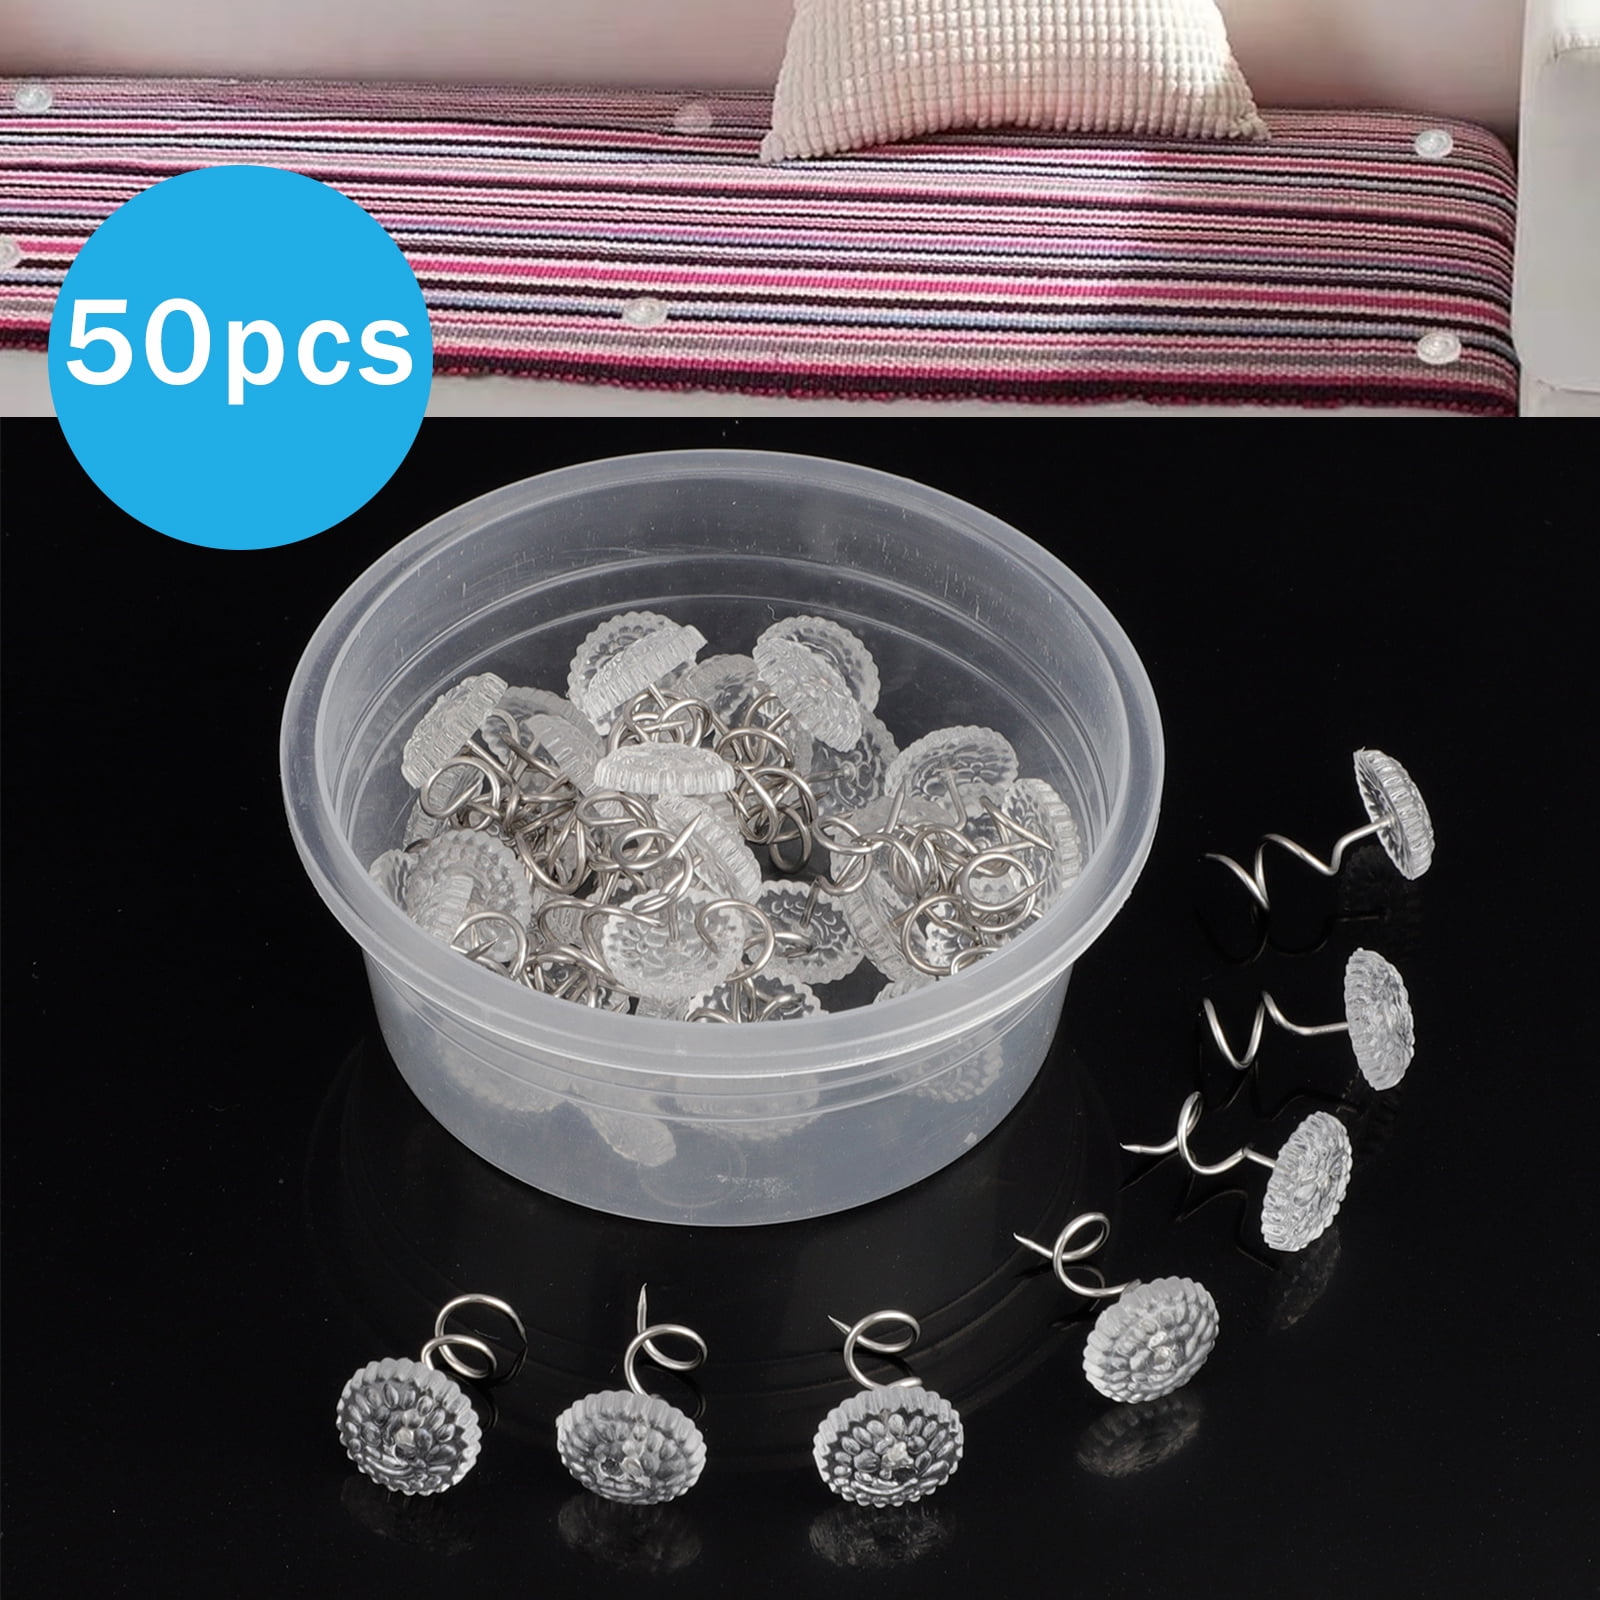 100 Pieces Clear Heads Twist Pins Spiral Pins Sofa Cushion Fixed Torsion Pins Bedskirt Pins with Plastic Storage Box for Furniture Upholstery